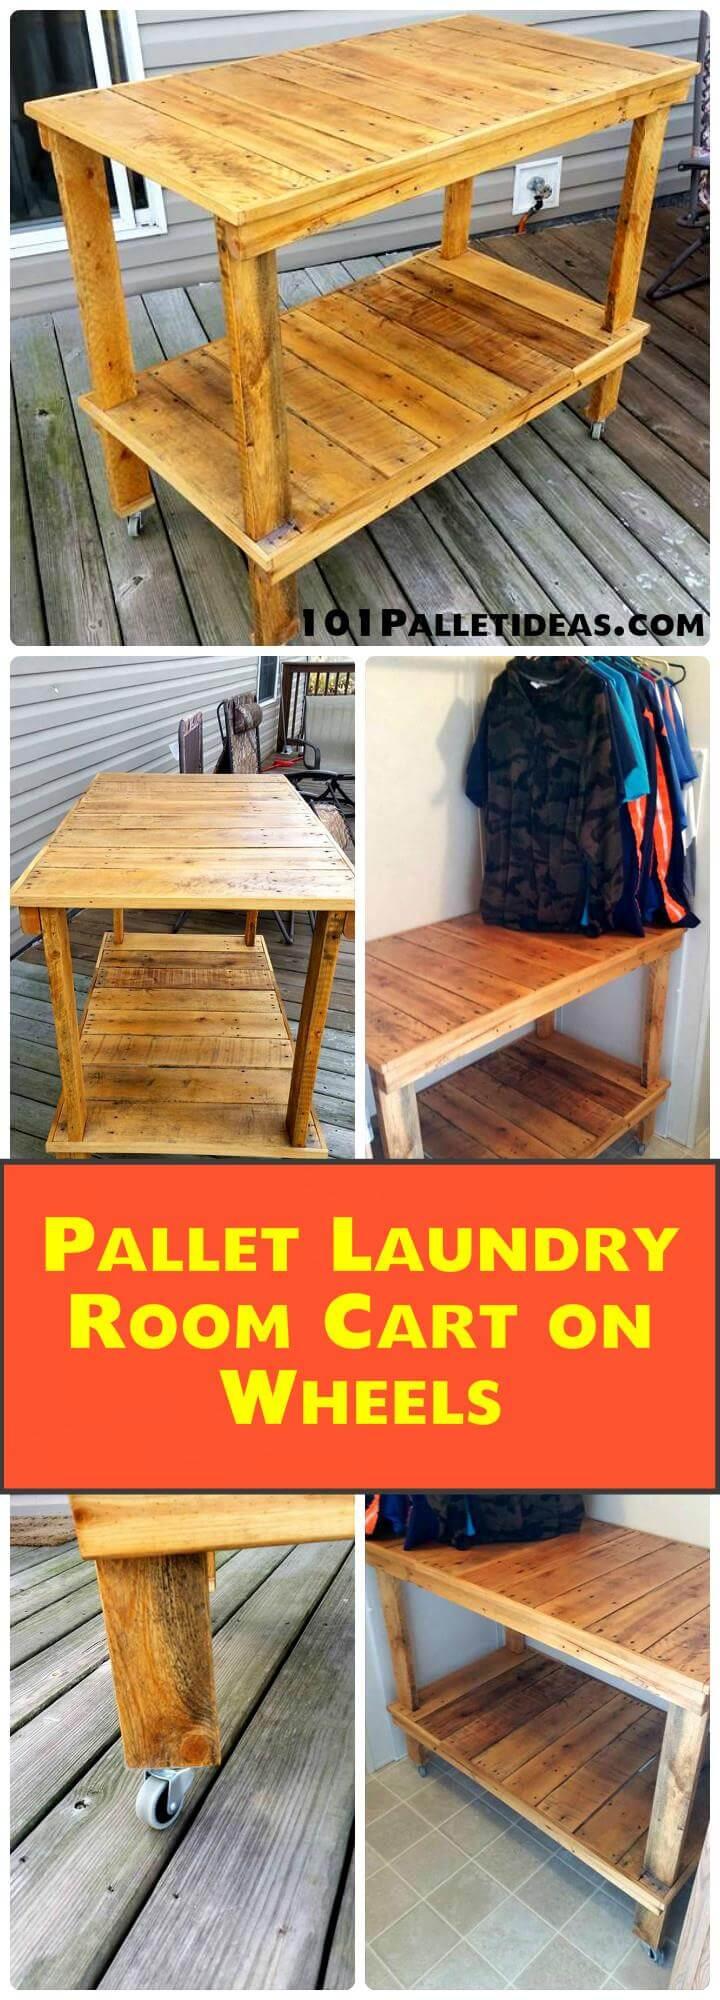 Pallet Laundry Room Cart on Wheels